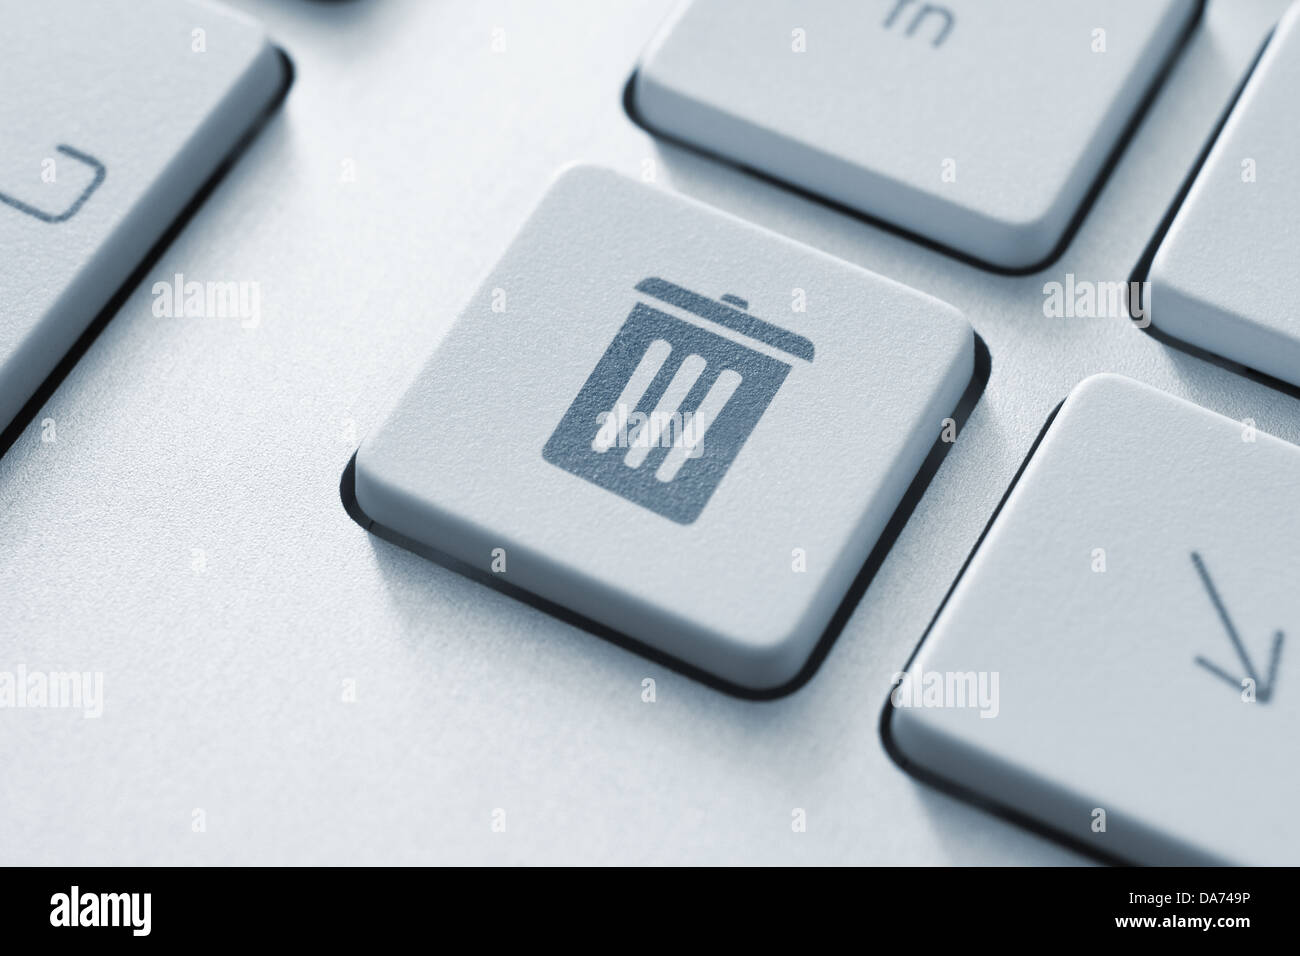 Computer button on a keyboard with recycle bin icon symbol Stock Photo